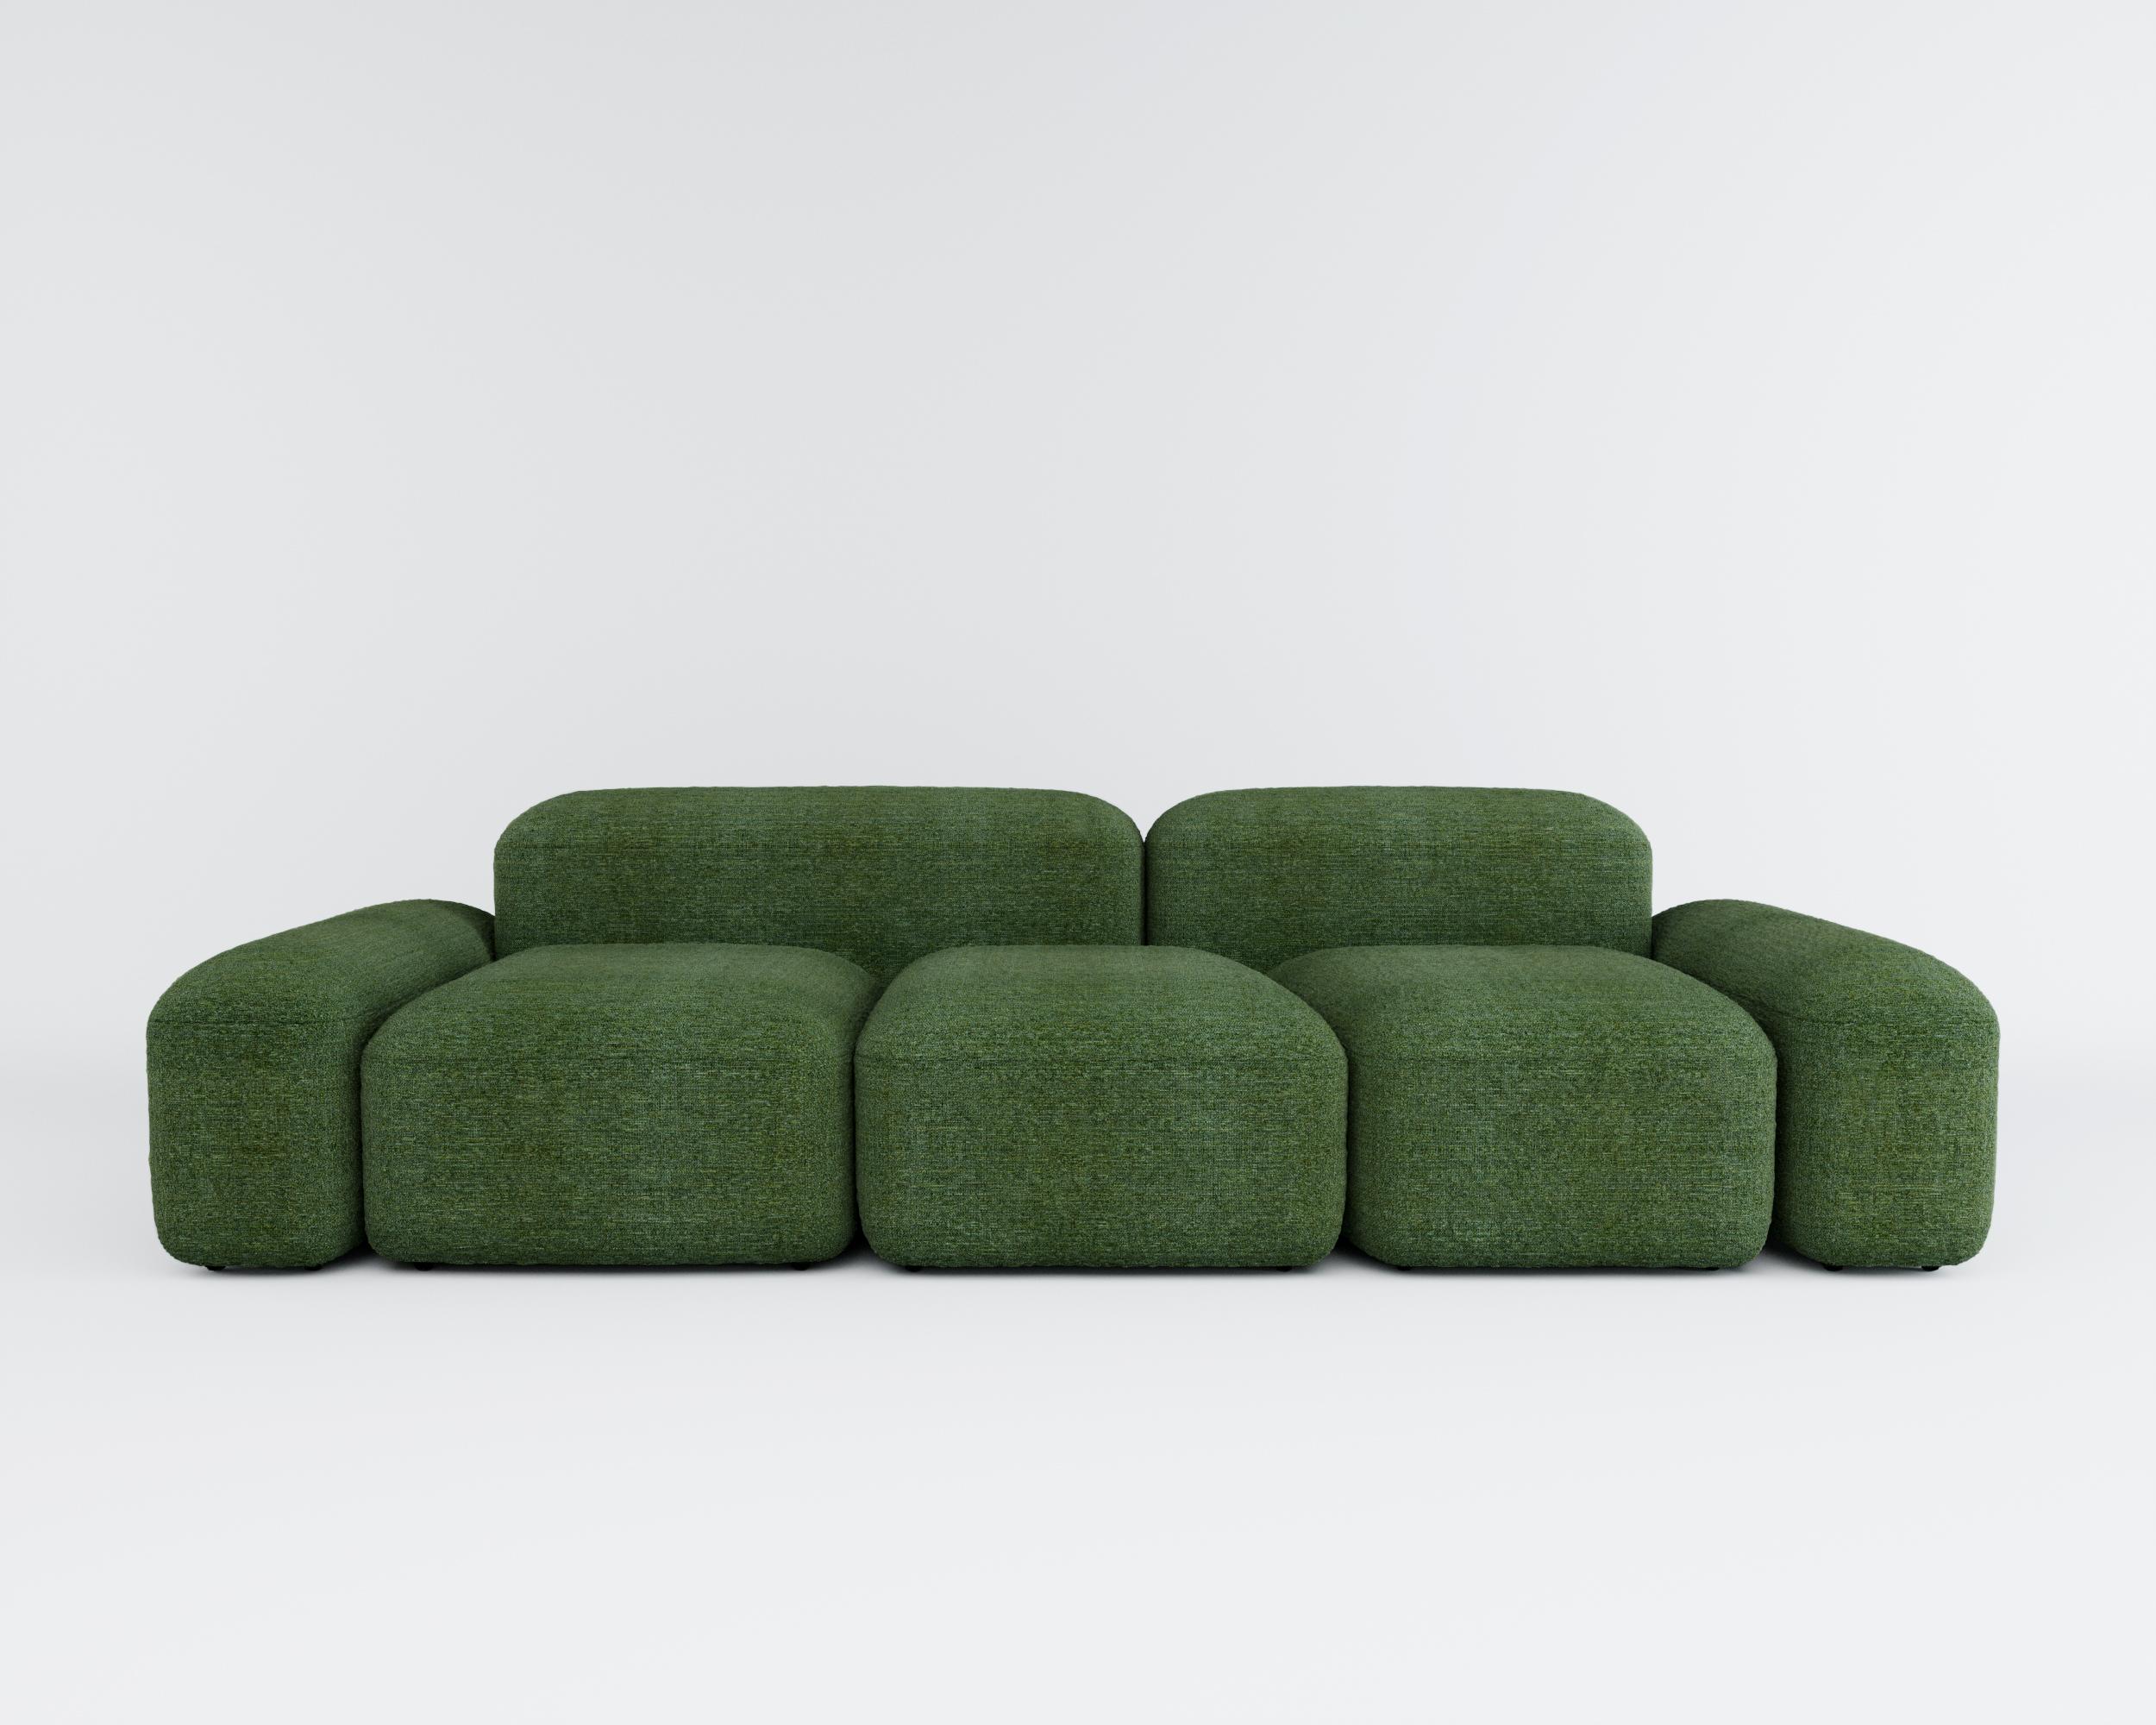 'Lapis' is a collection of sofas and seats with very organic and Minimalist shapes.
Designer: Emanuel Gargano
Maker: Amura Lab  

Lapis 060
3-seat / 278cm L

'Lapis' can be made in several dimension and combinations, according to spaces and